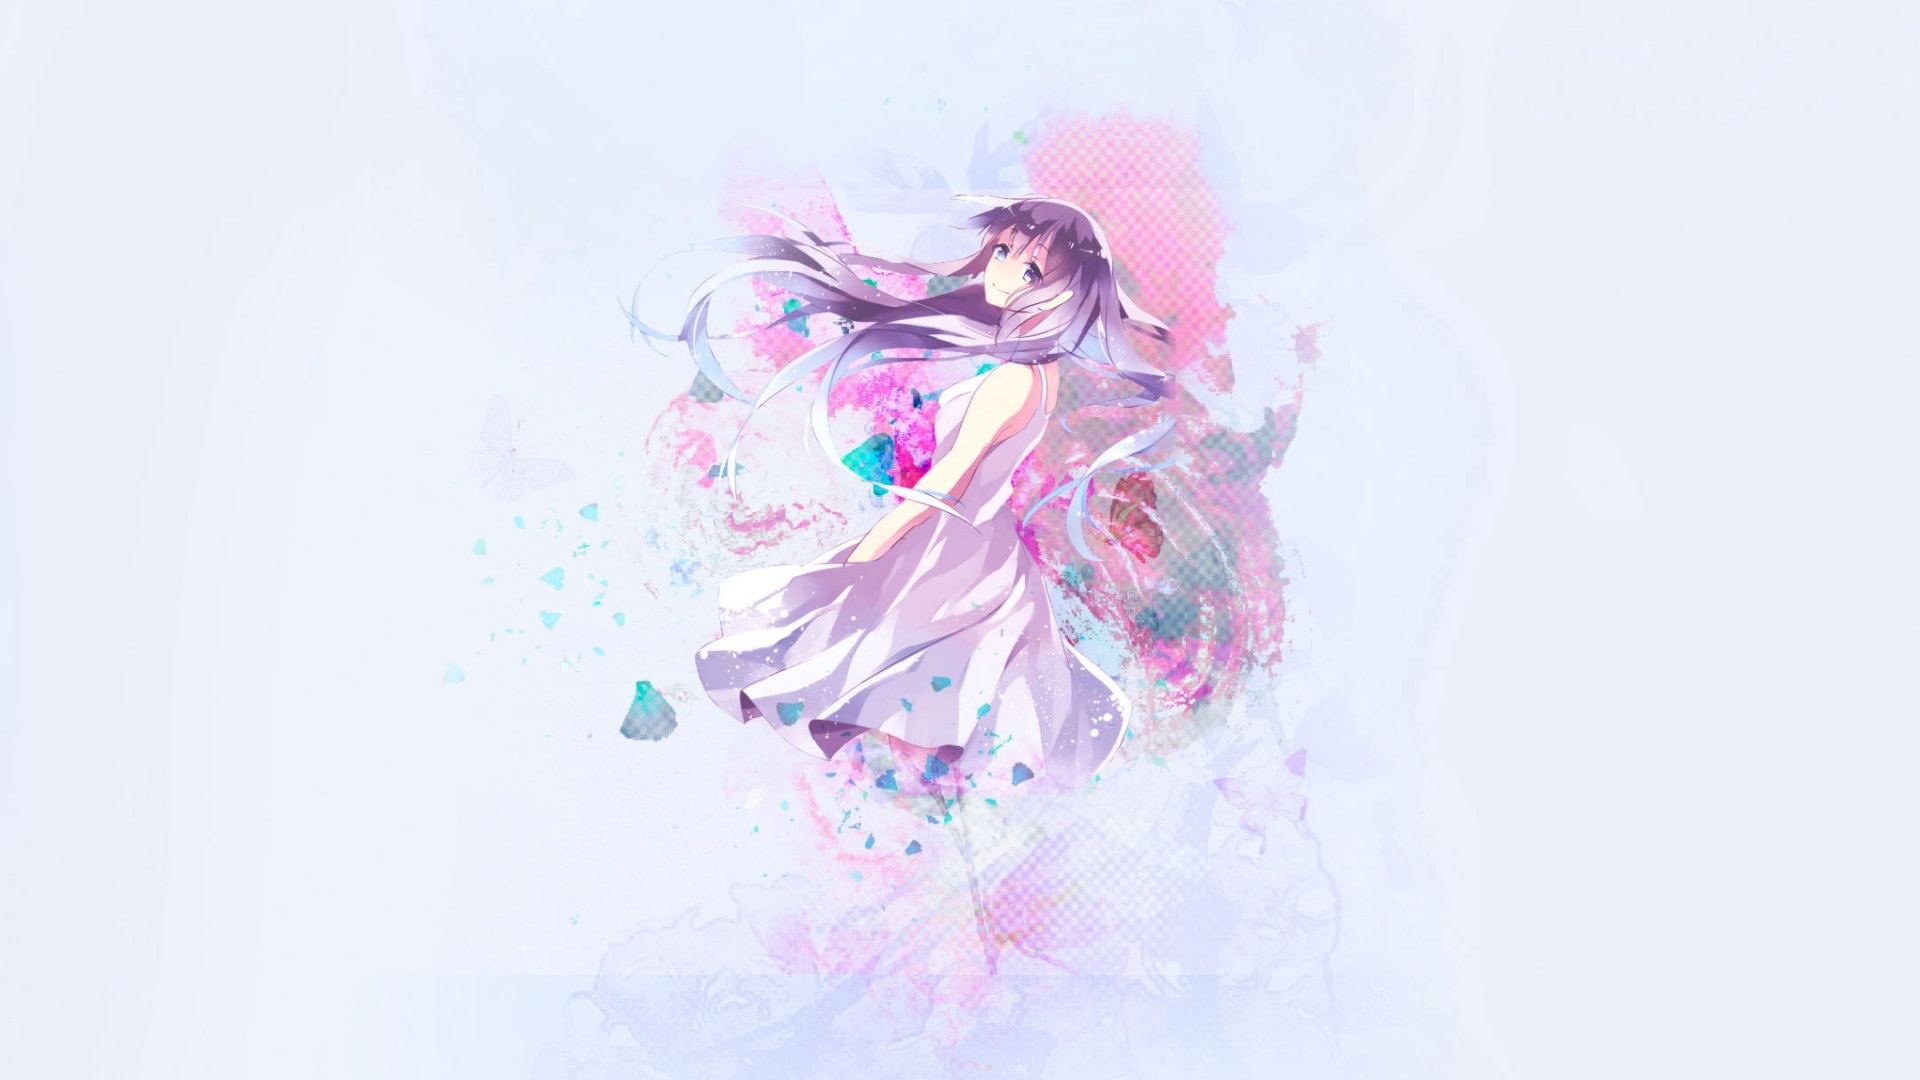 Pastel Anime Wallpaper, Woman In Pink Dress Wallpaper, Artistic, Colorful • Wallpaper For You